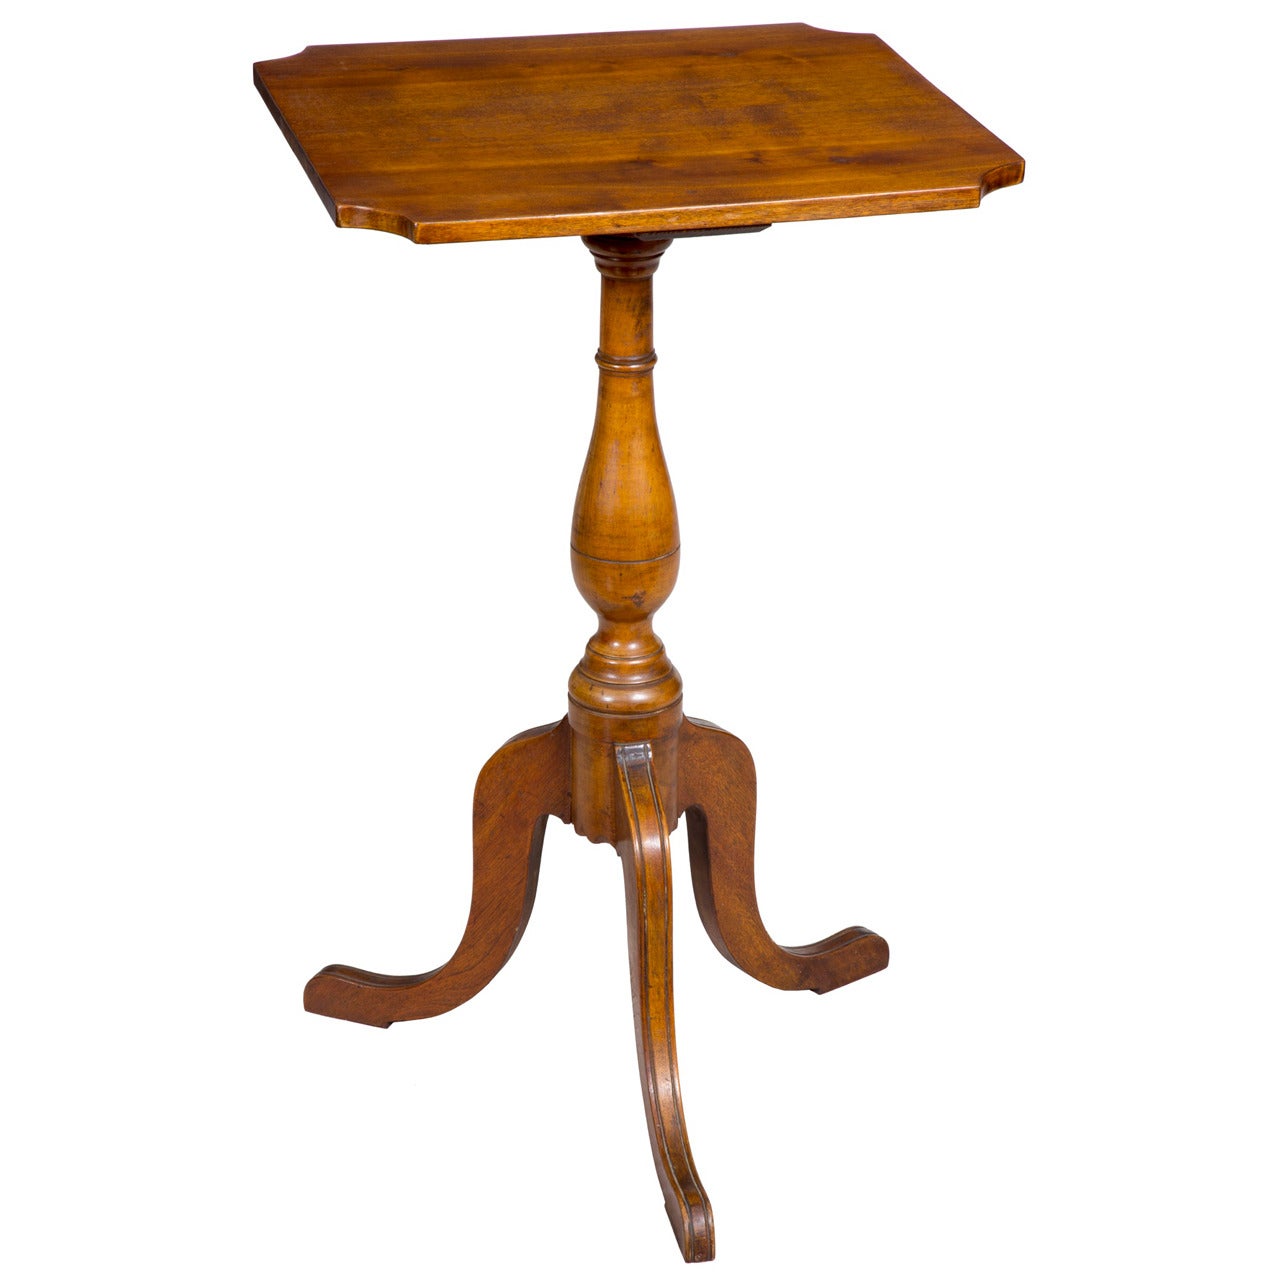 Birch Federal Candle Stand with Notched Corners, circa 1820